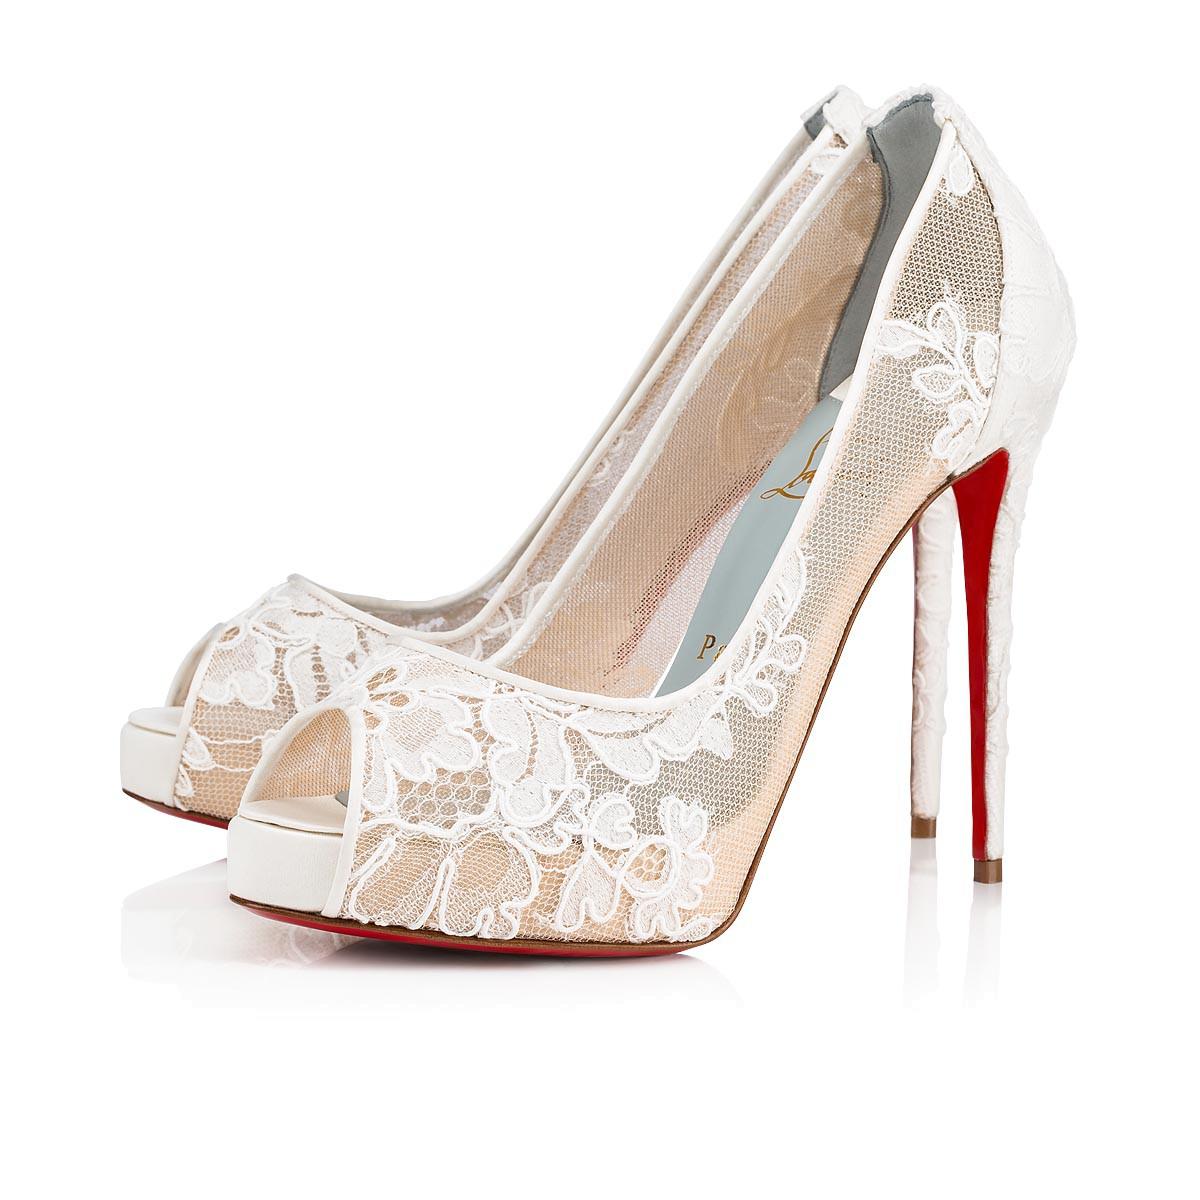 Lyst Christian Louboutin Very Lace in White